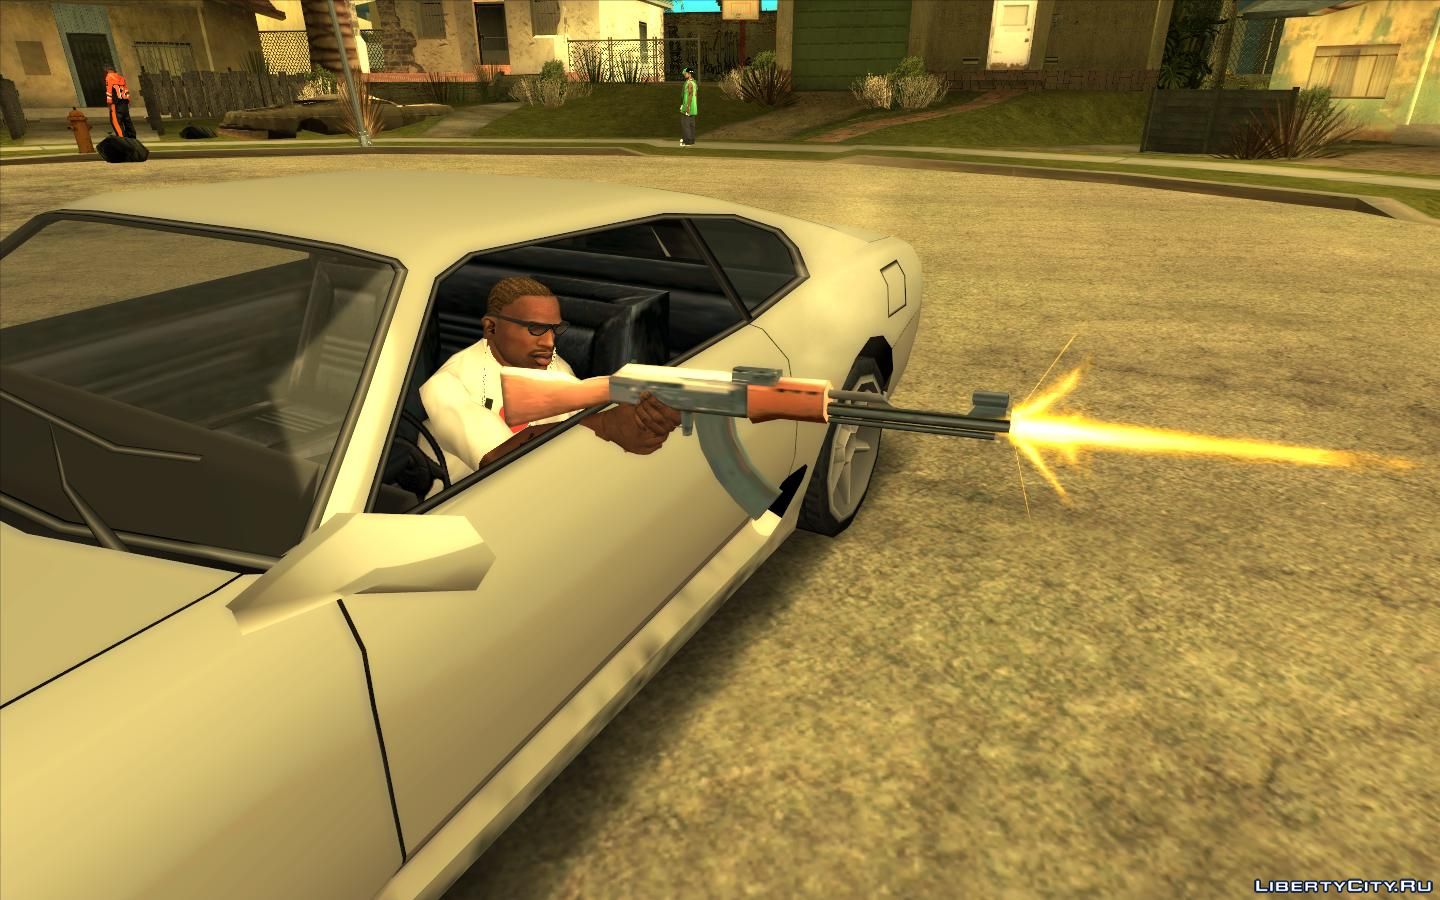 Do y'all remember this beast of a vehicle in GTA: SA? I'm playing